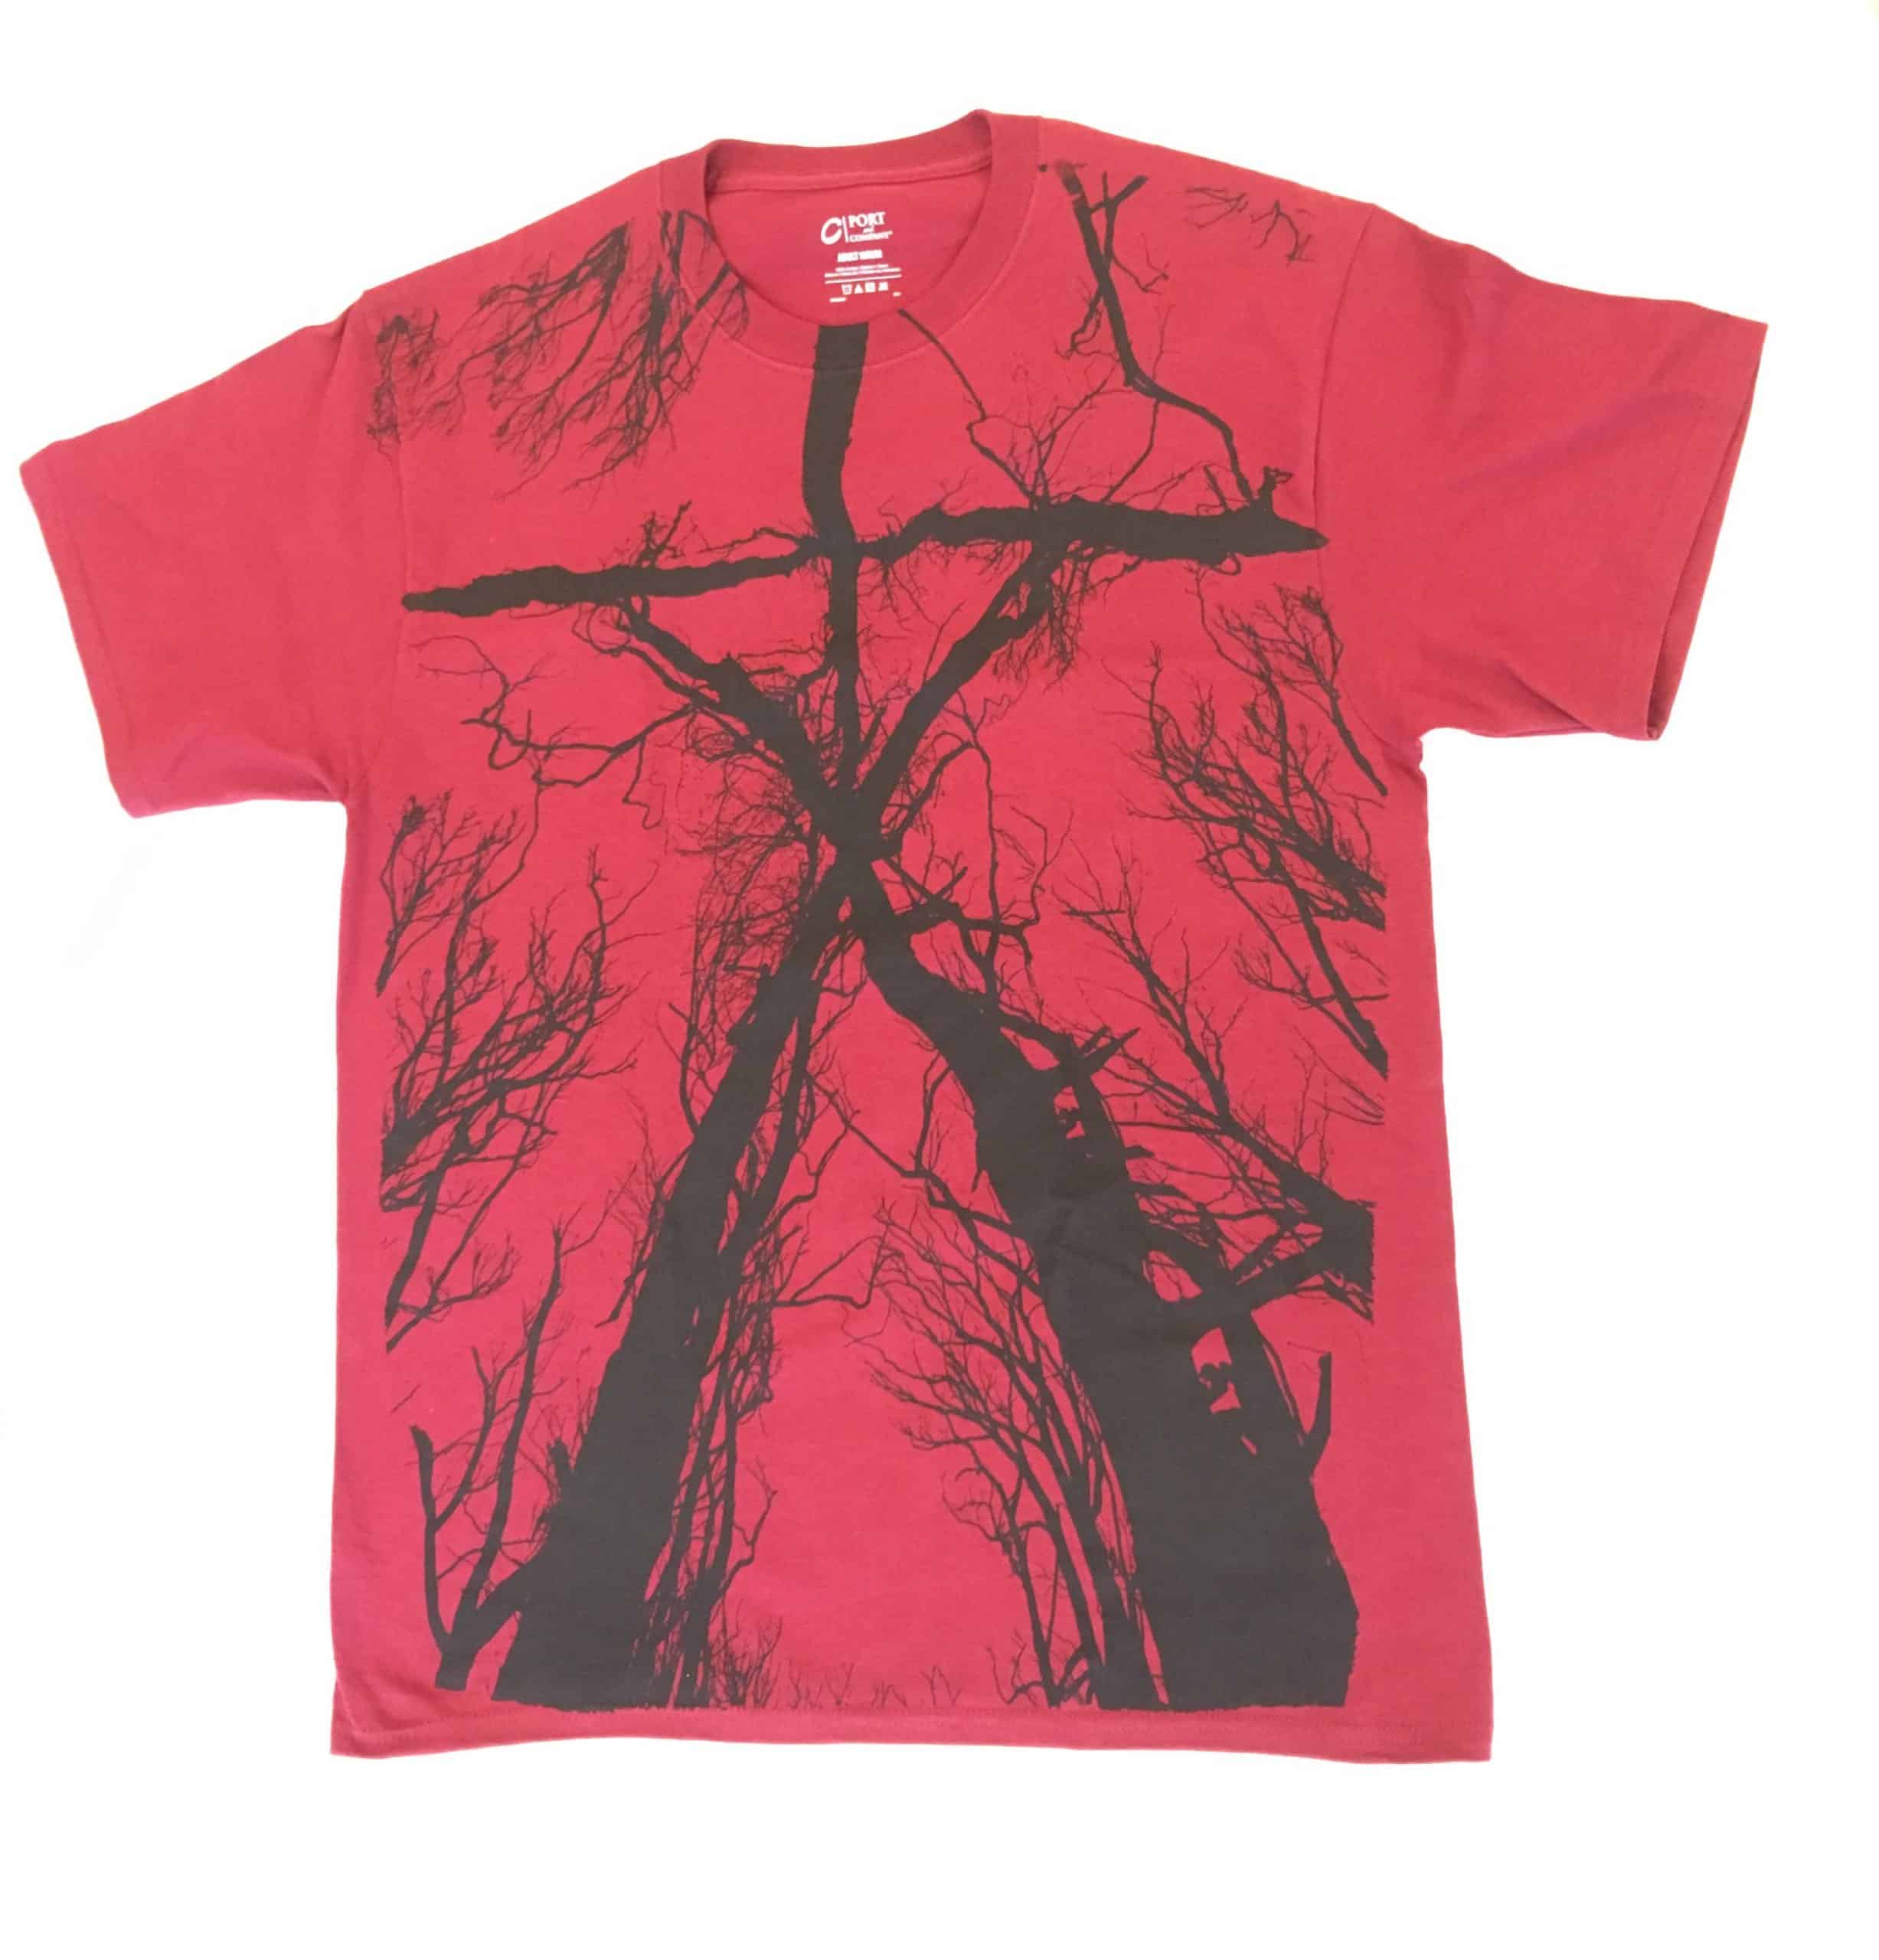 mt_ignore: Voorkant blair witch t shirt